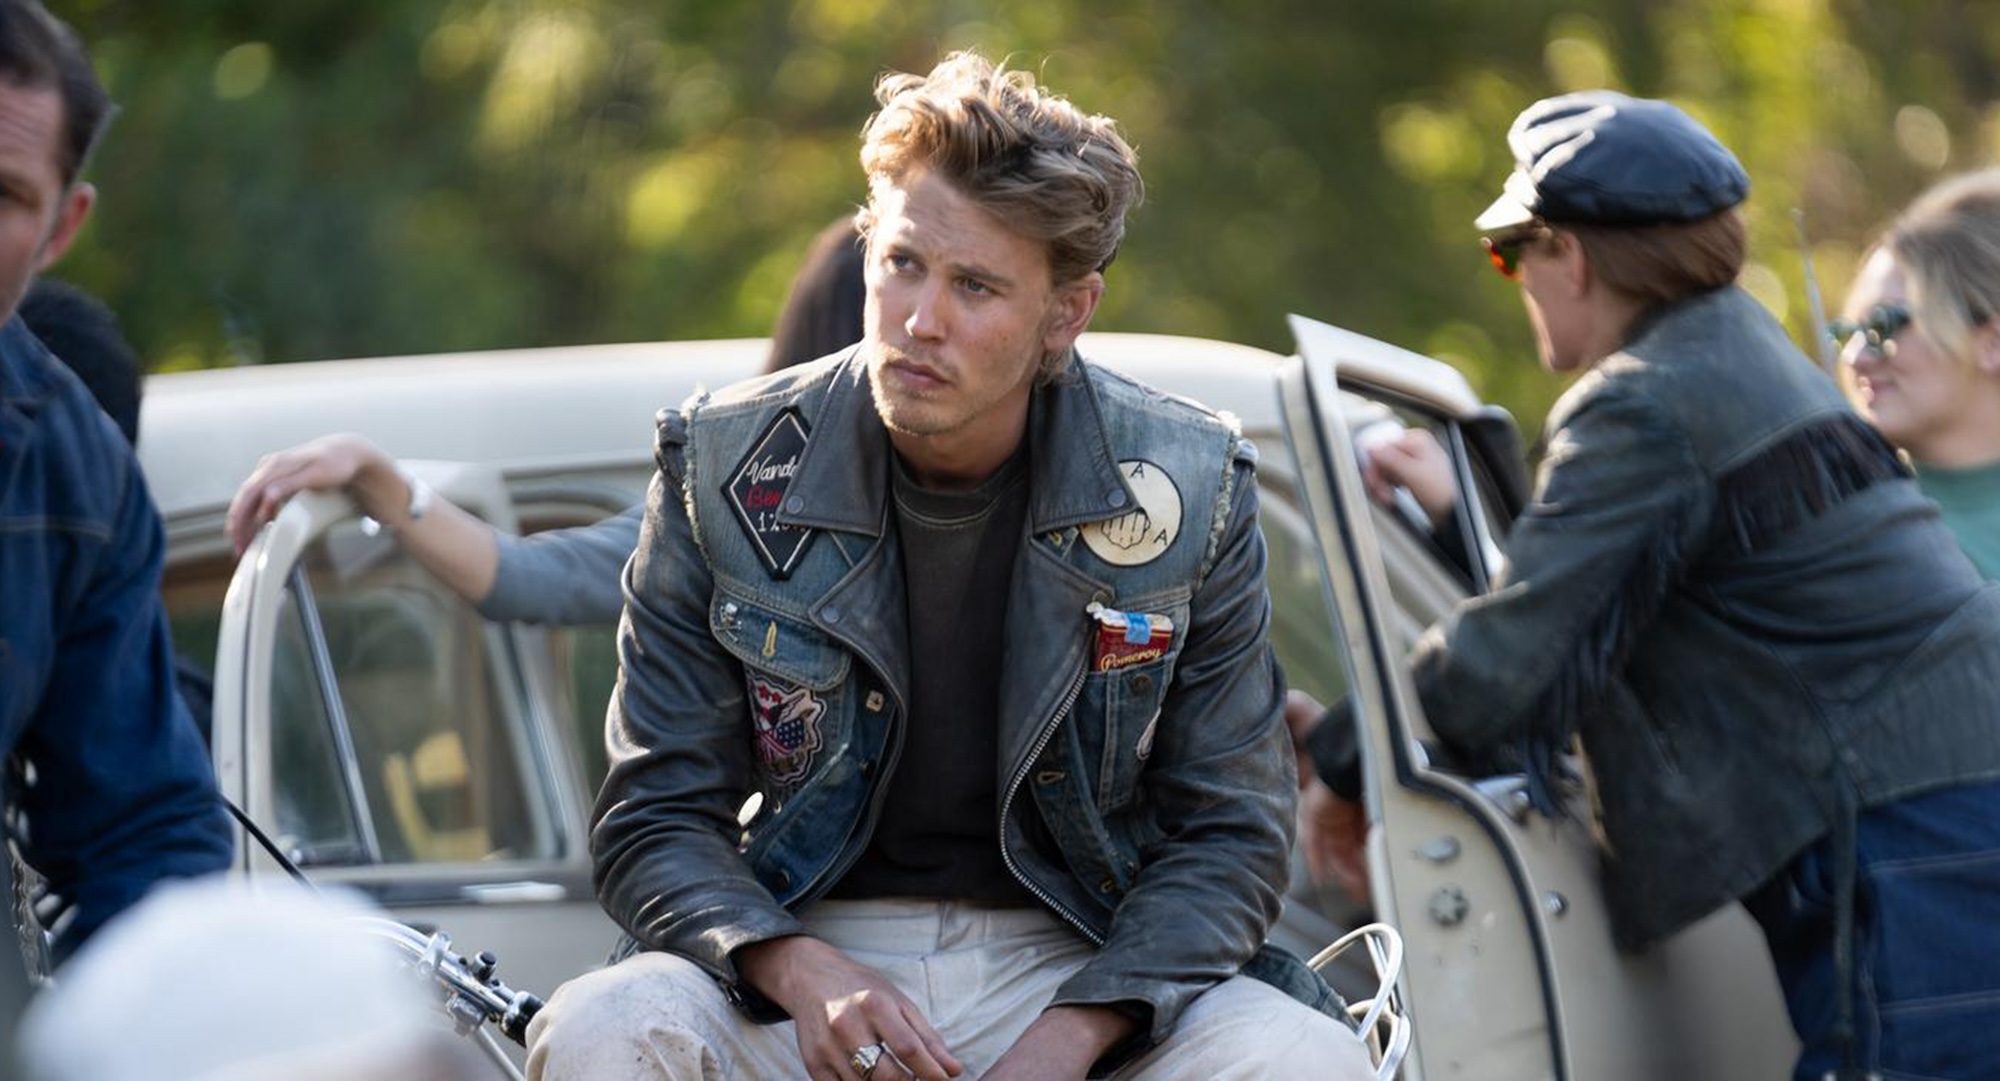 Austin Butler as Benny in The Bikeriders. He sits slouched and scruffy in a jacket covered in patches.